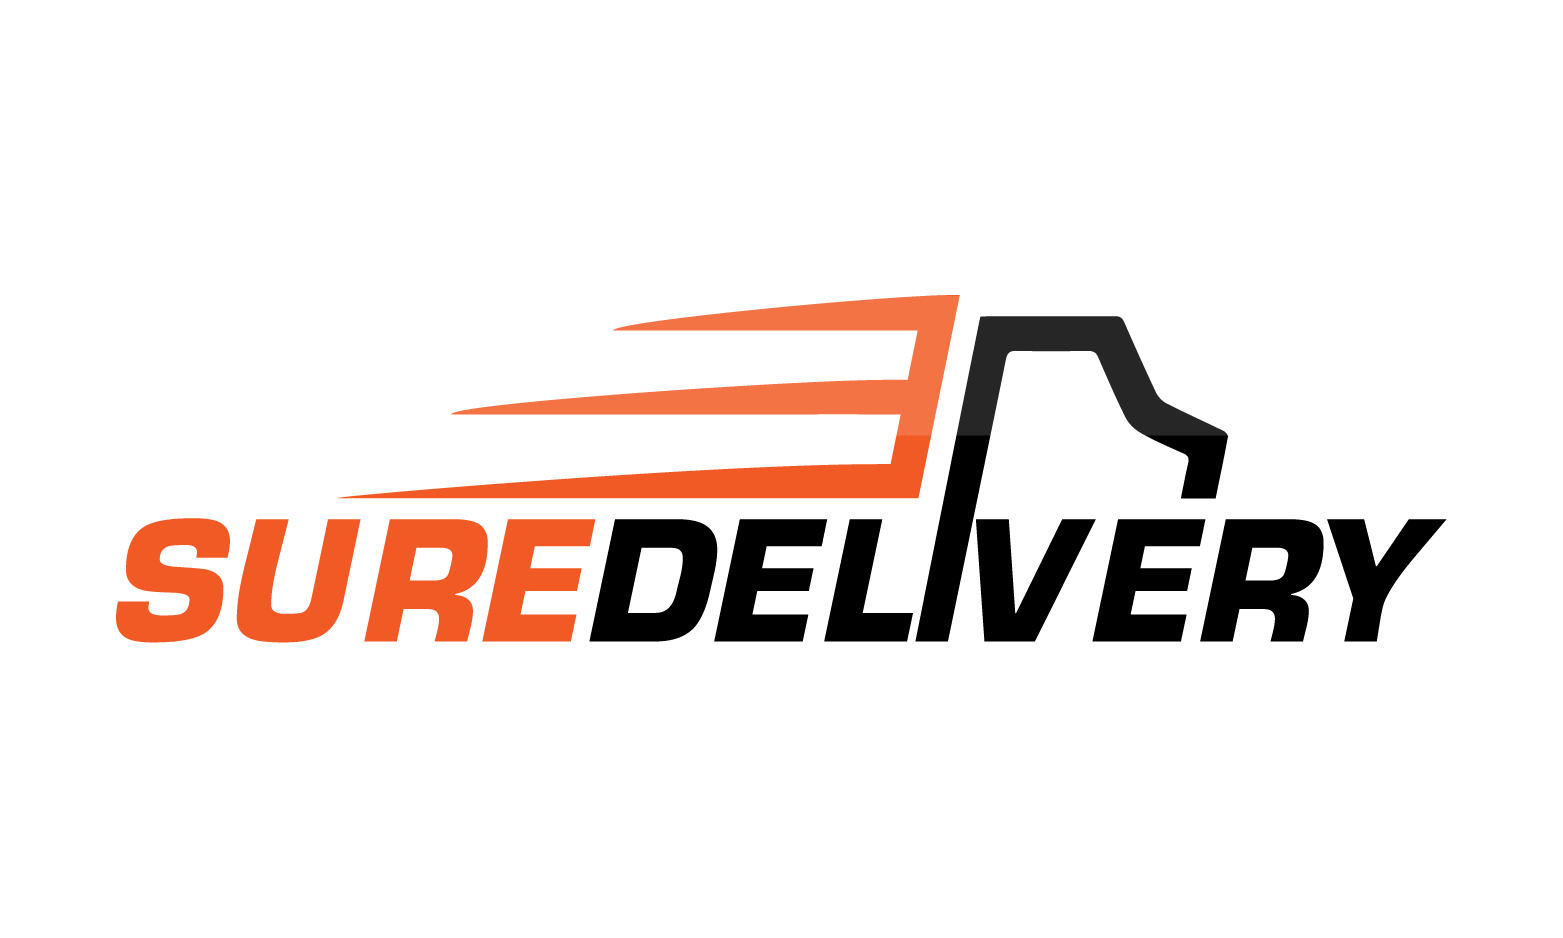 SureDelivery.com - Creative brandable domain for sale